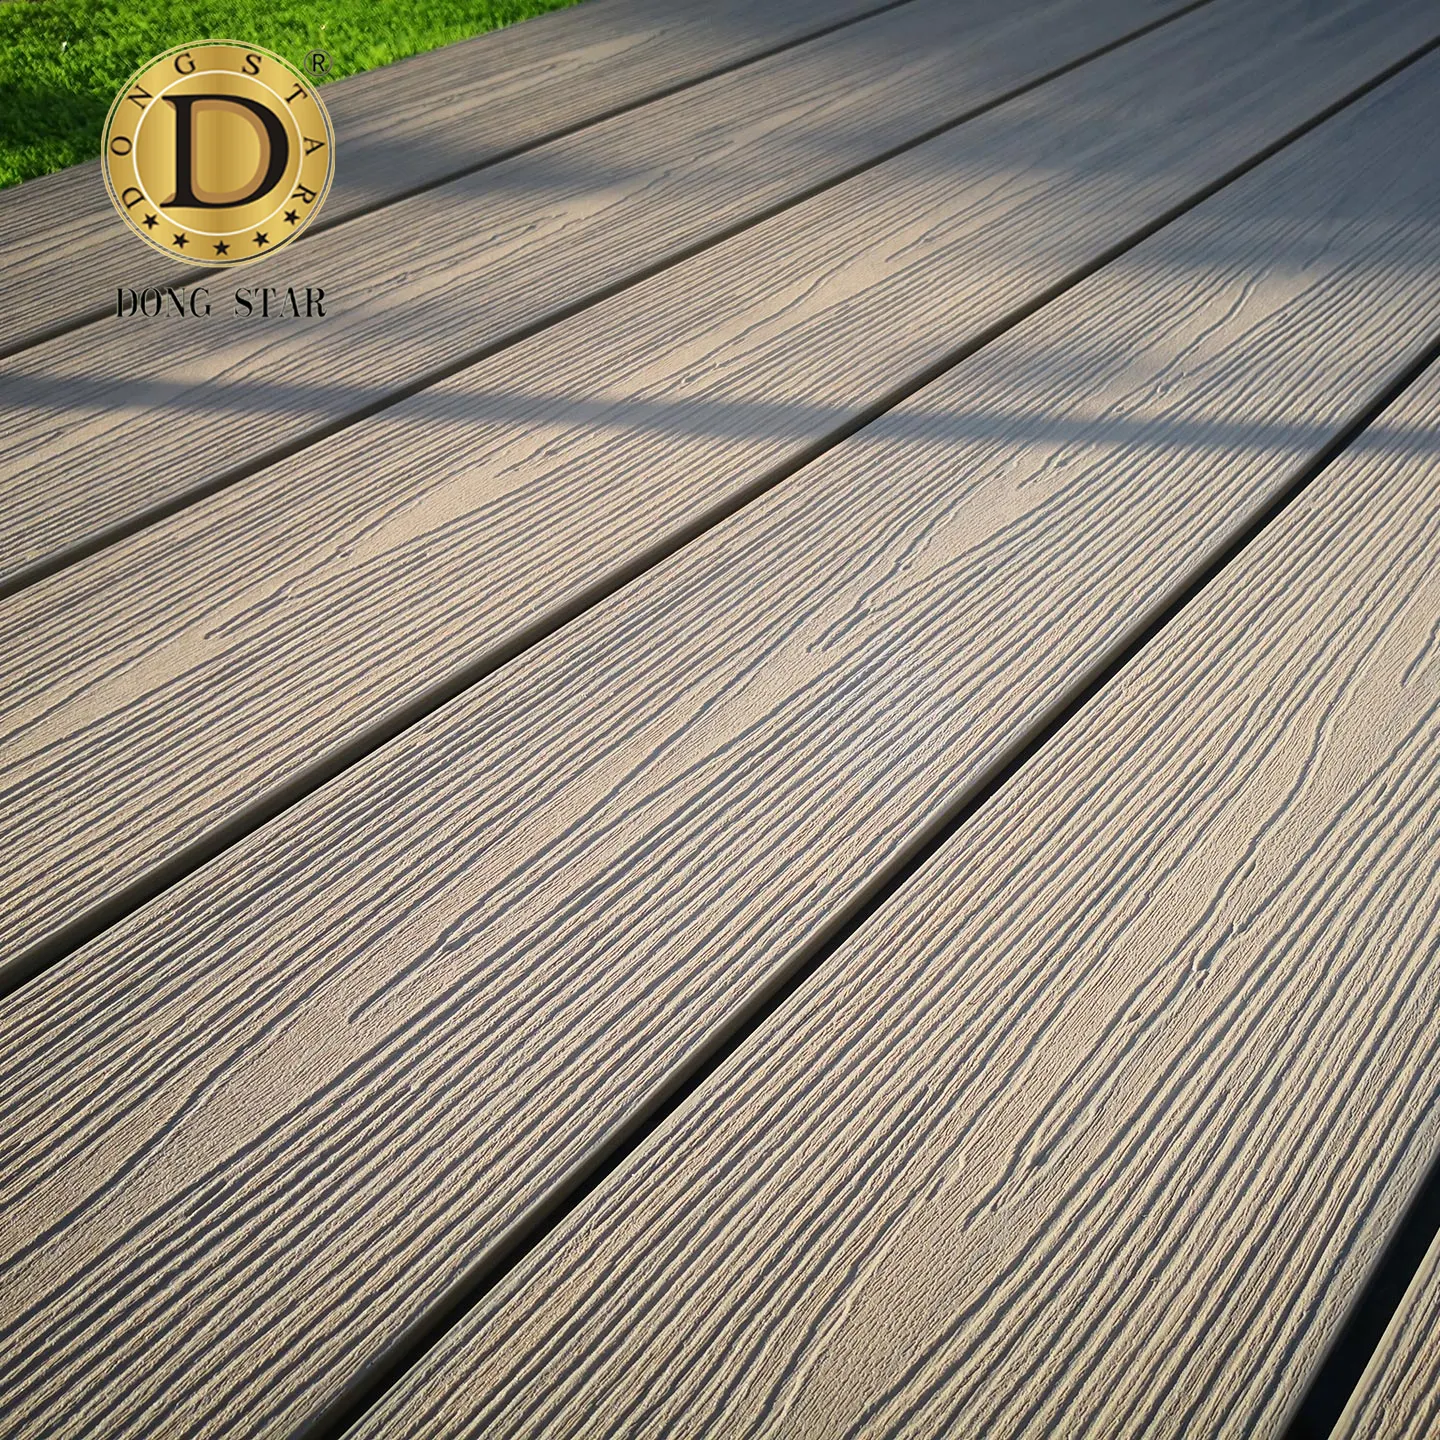 Hout Kunststof Vloer, Wpc China Fabricage 150X25Mm Hollow Outdoor Wpc Terras Board Decking